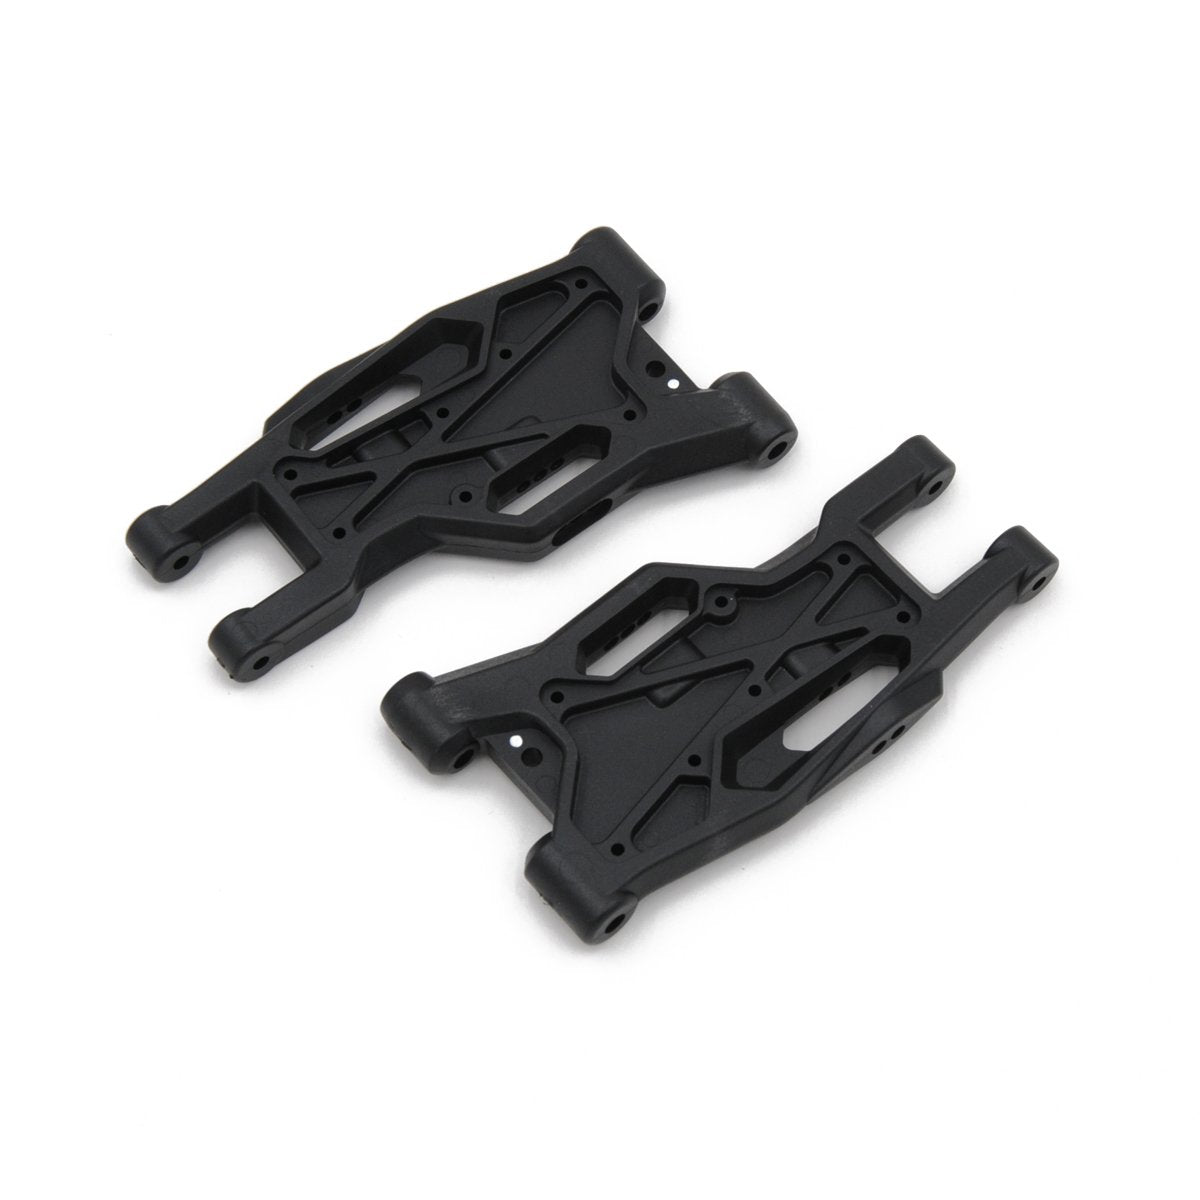 HB Racing Front Suspension Arms Set DW8S (Hard)